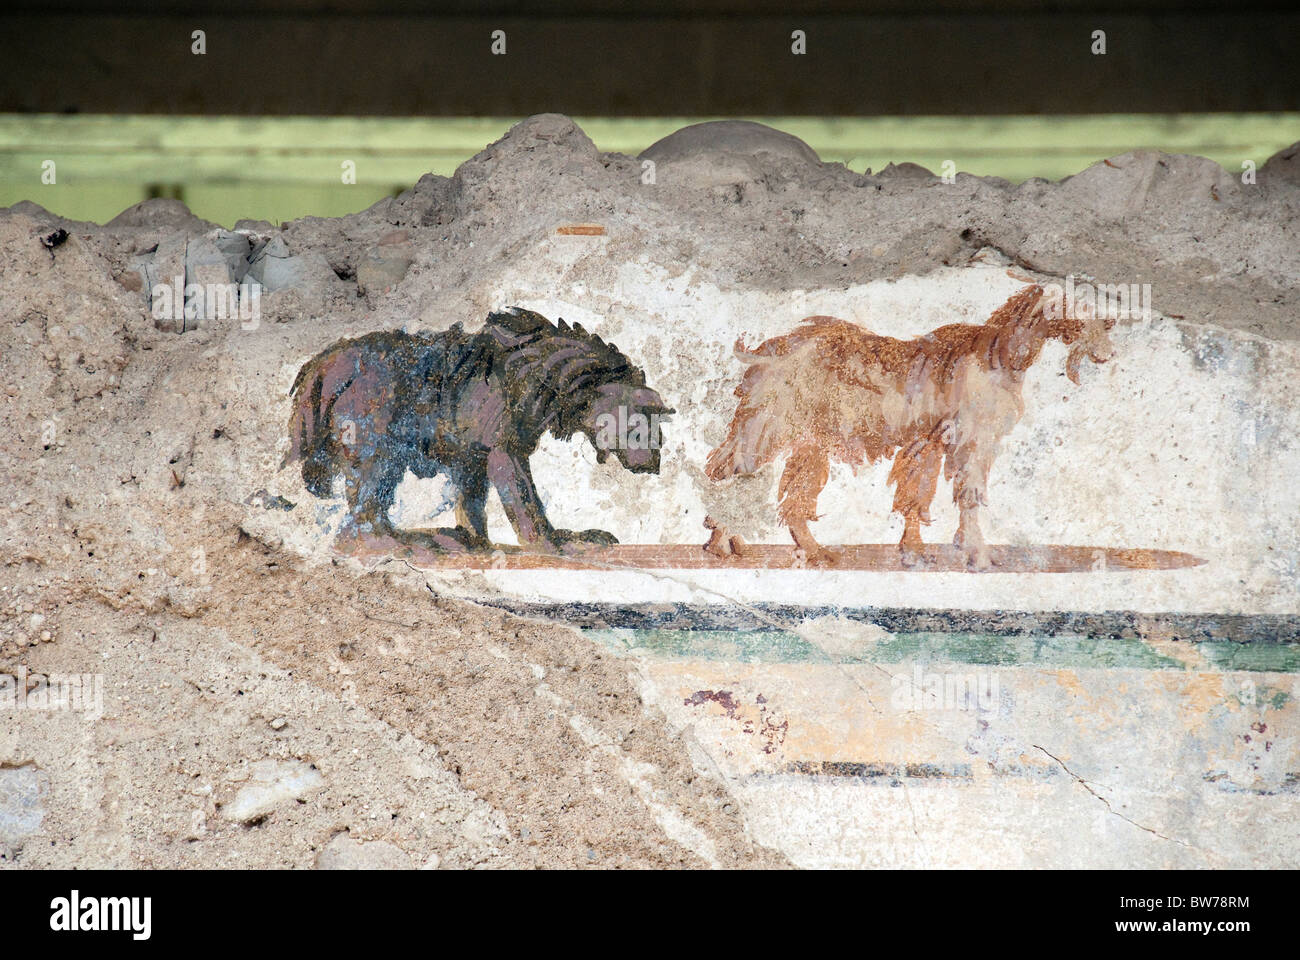 frescoes of a hairy bear and a goat in  the ancient roman city of Urbs Salvia, Le Marche, Italy Stock Photo